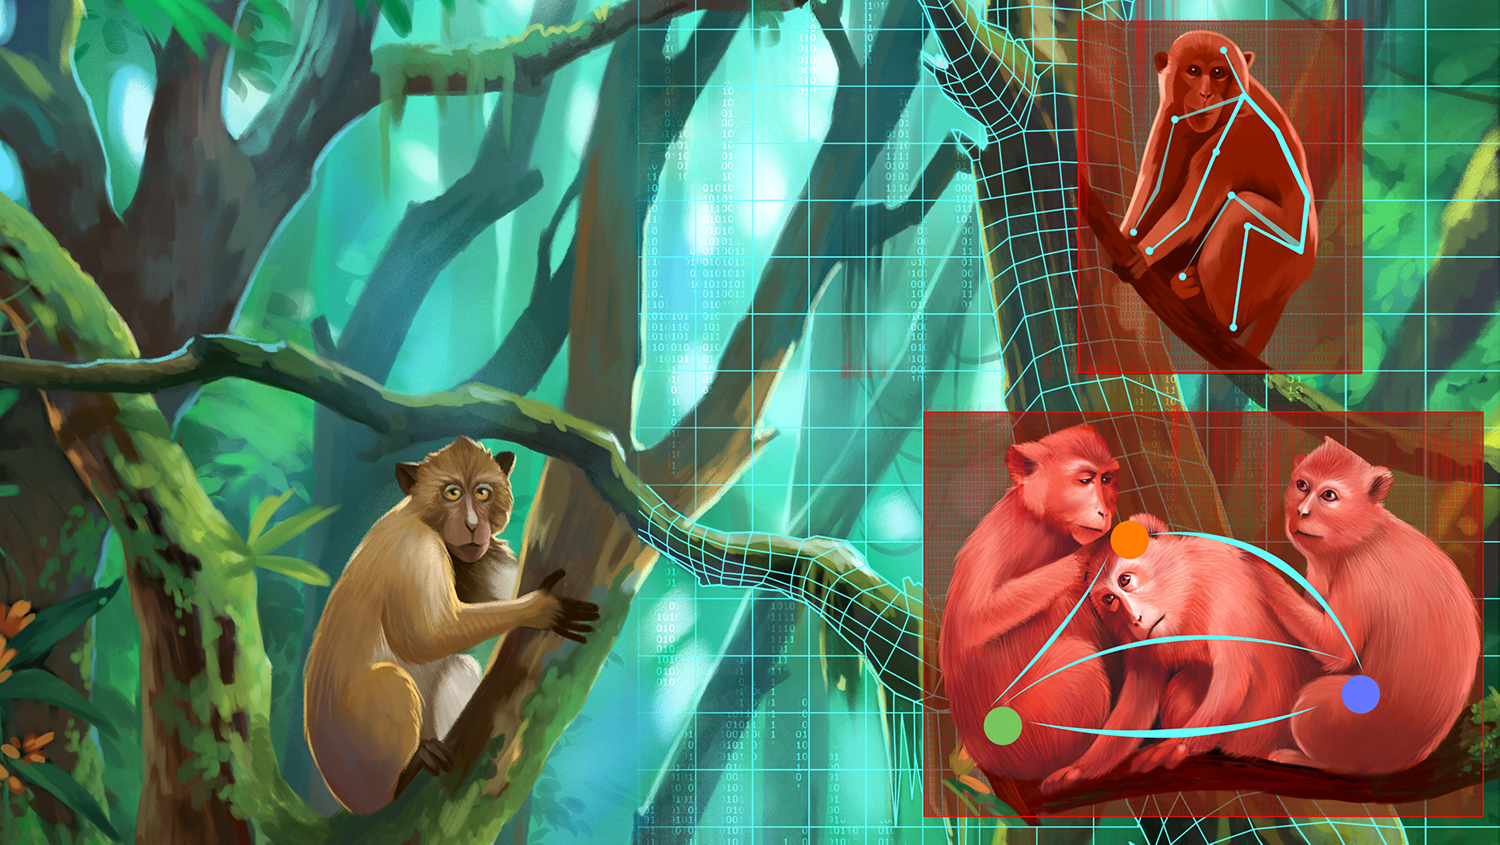 Illustration of monkeys in a tree being analyzed by AI.